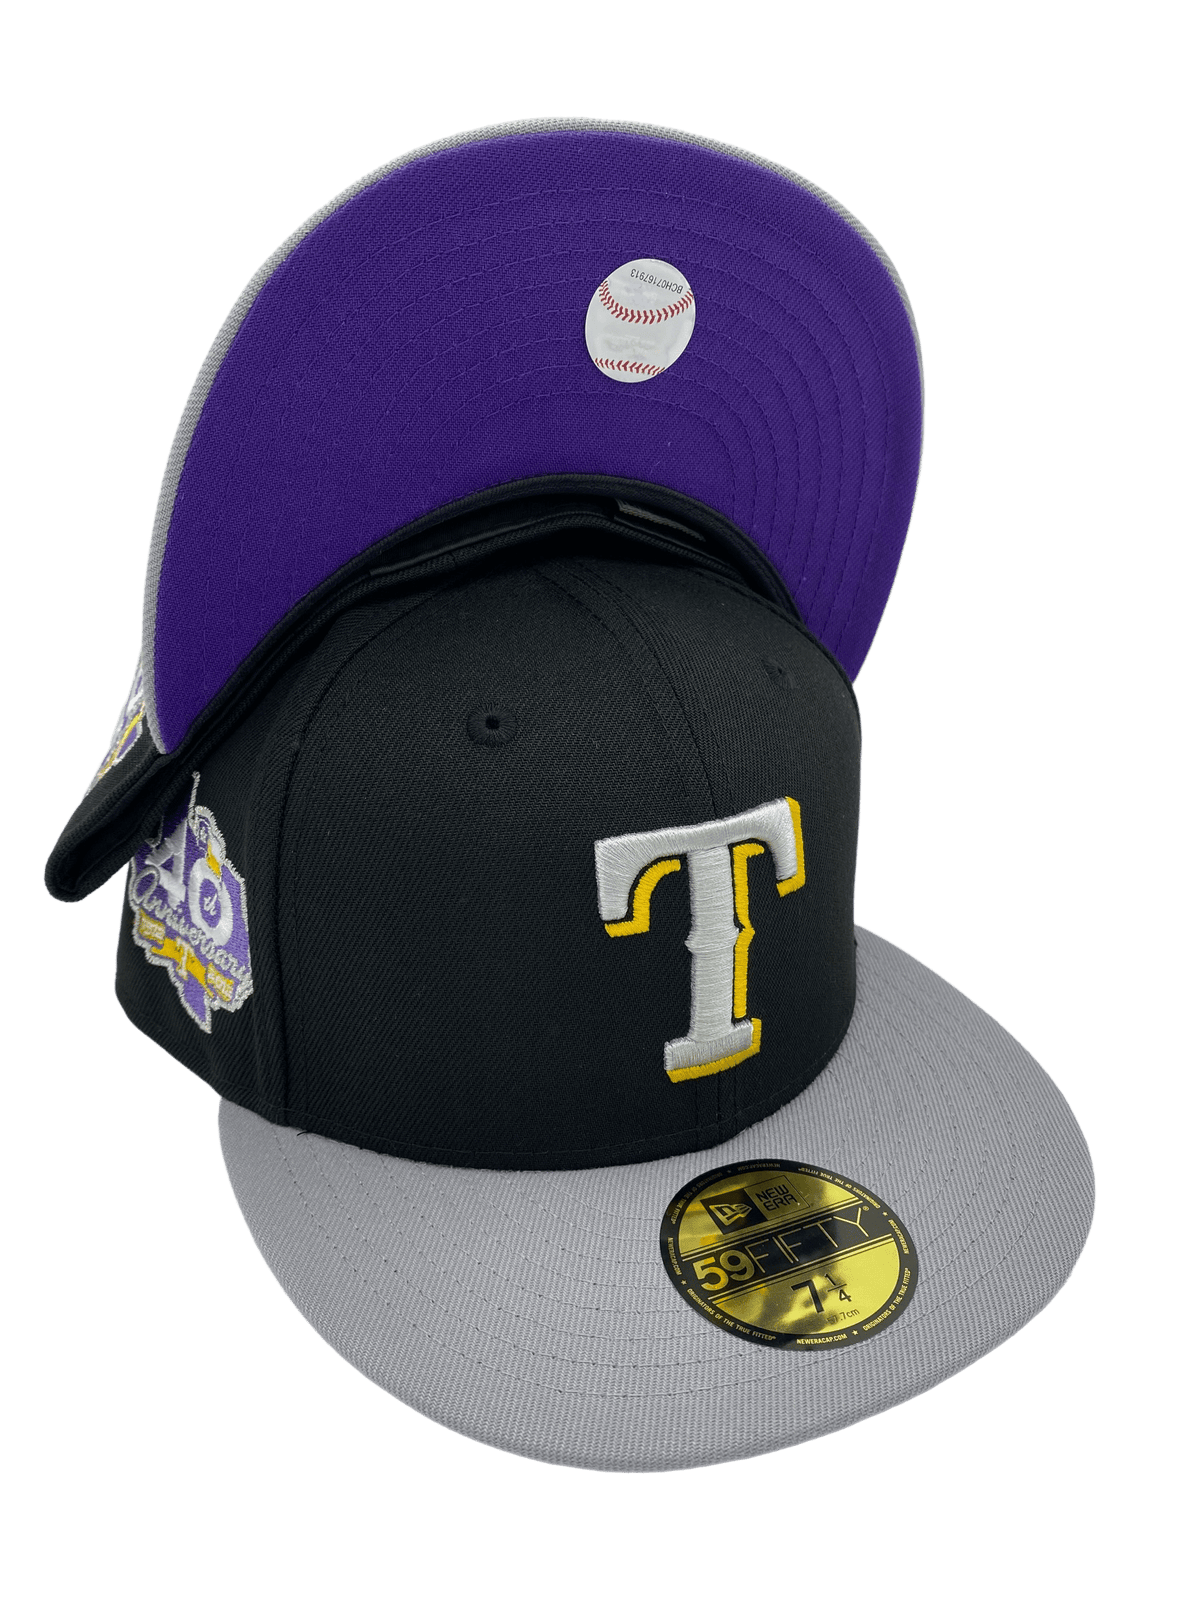 New Era 59FIFTY Texas Rangers Alternate 2 Authentic Collection on Field Fitted Hat Light Blue